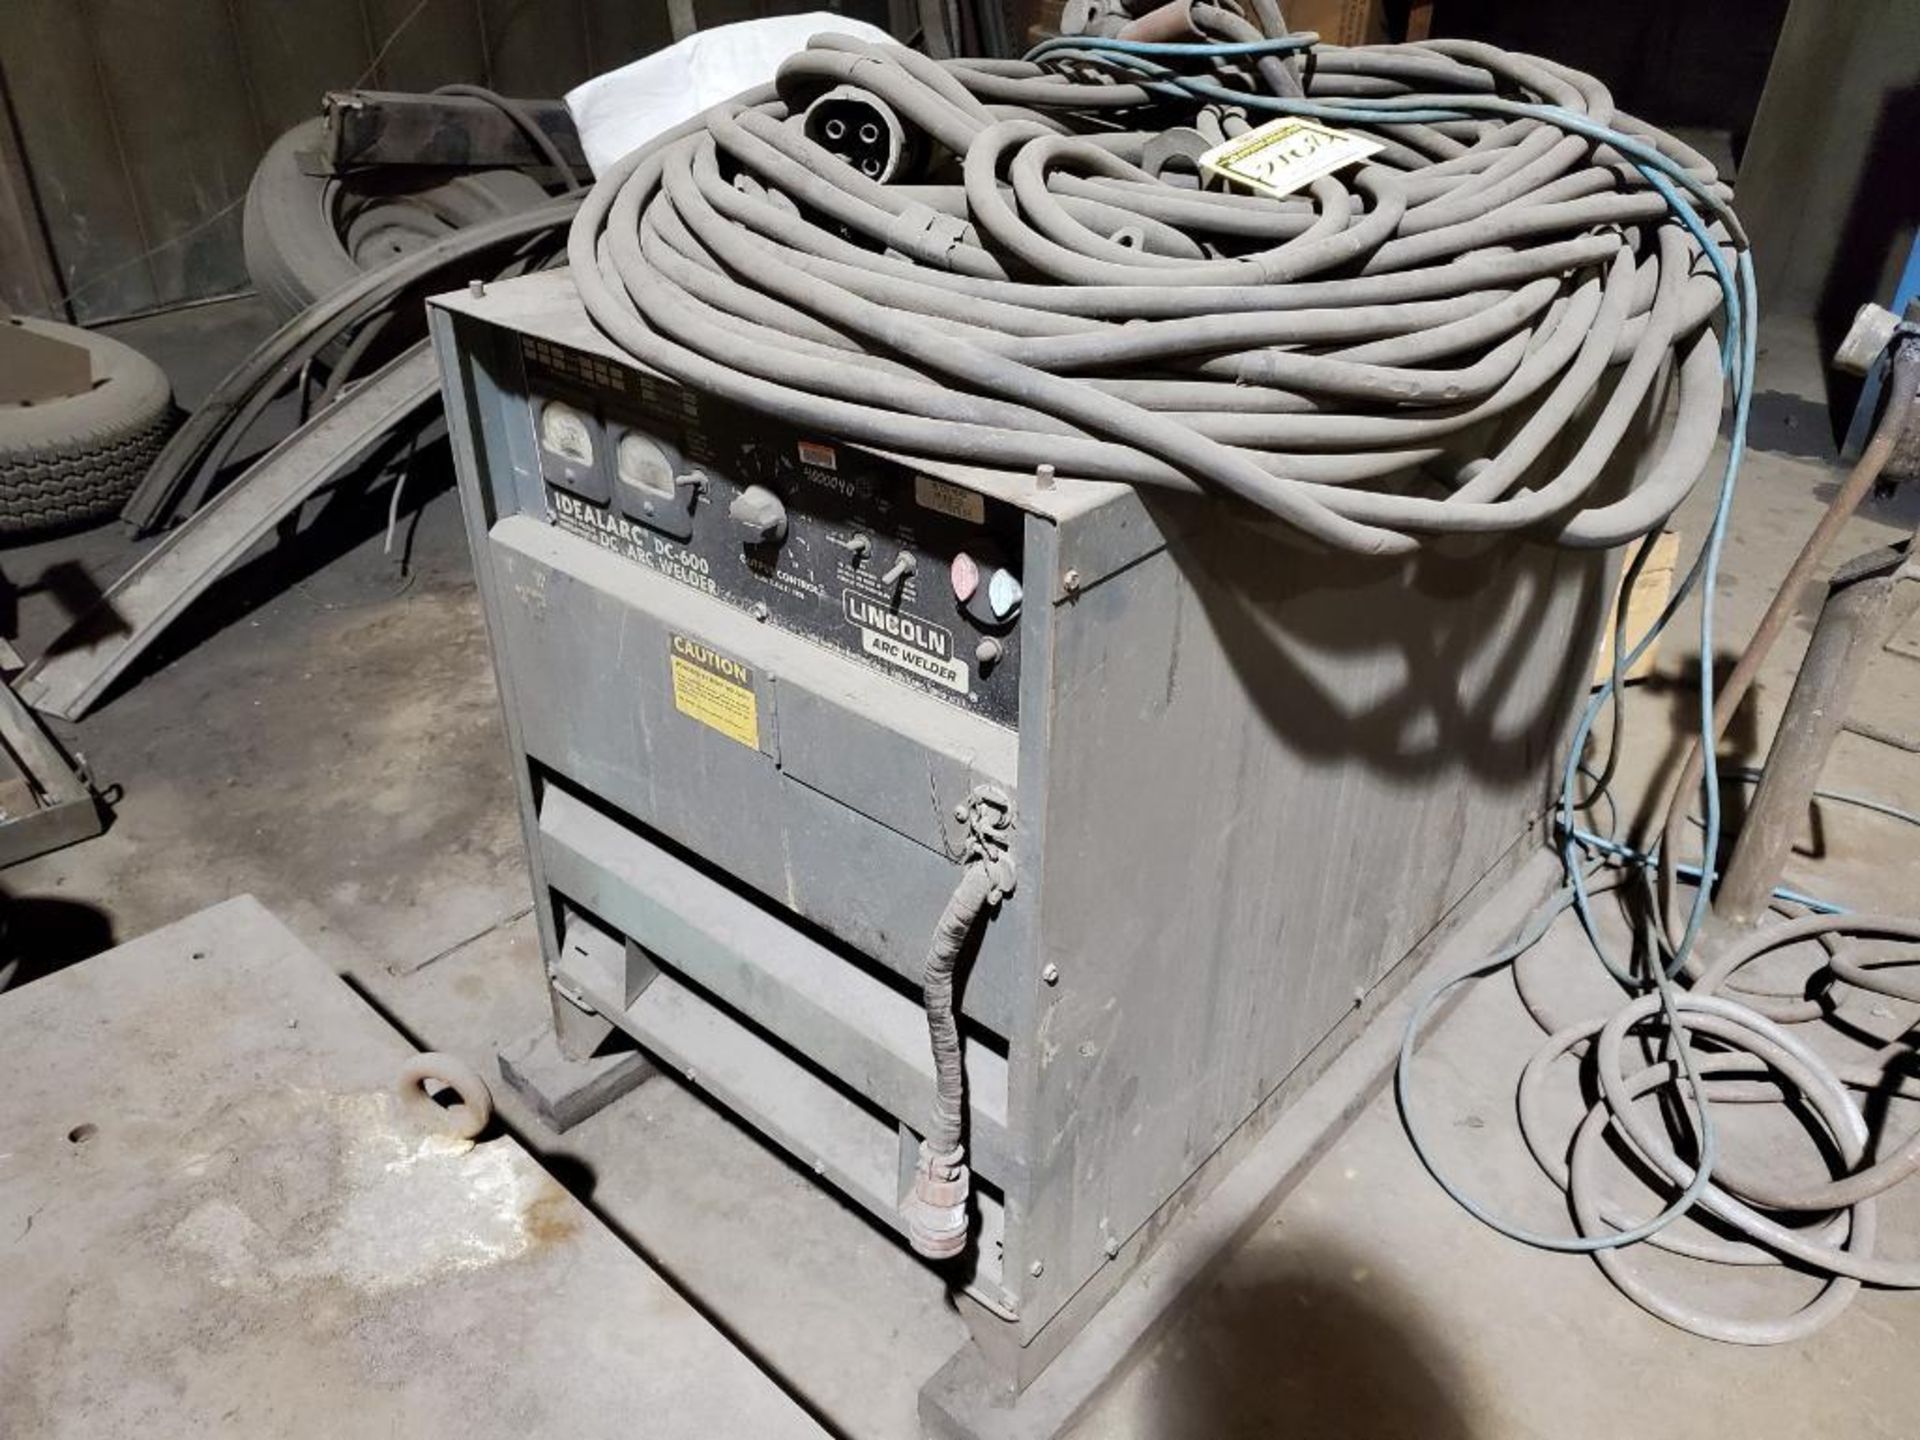 LINCOLN ARC WELDER IDEALARC DC-600 WITH WIRE FEEDER, MODEL DC-600, CODE NUMBER 8249-M, S/N AC465831, - Image 2 of 8